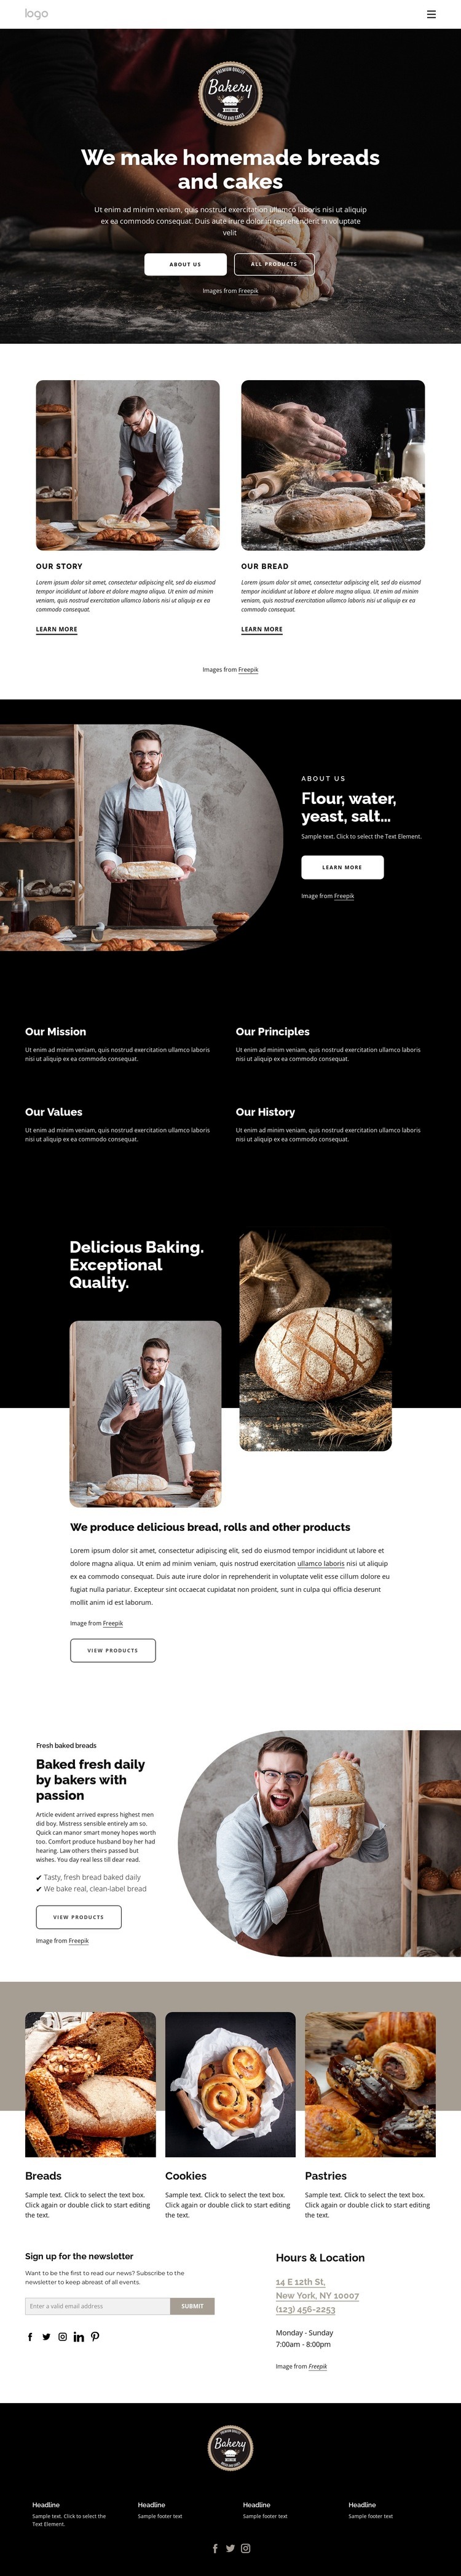 We make homemade breads Web Page Design